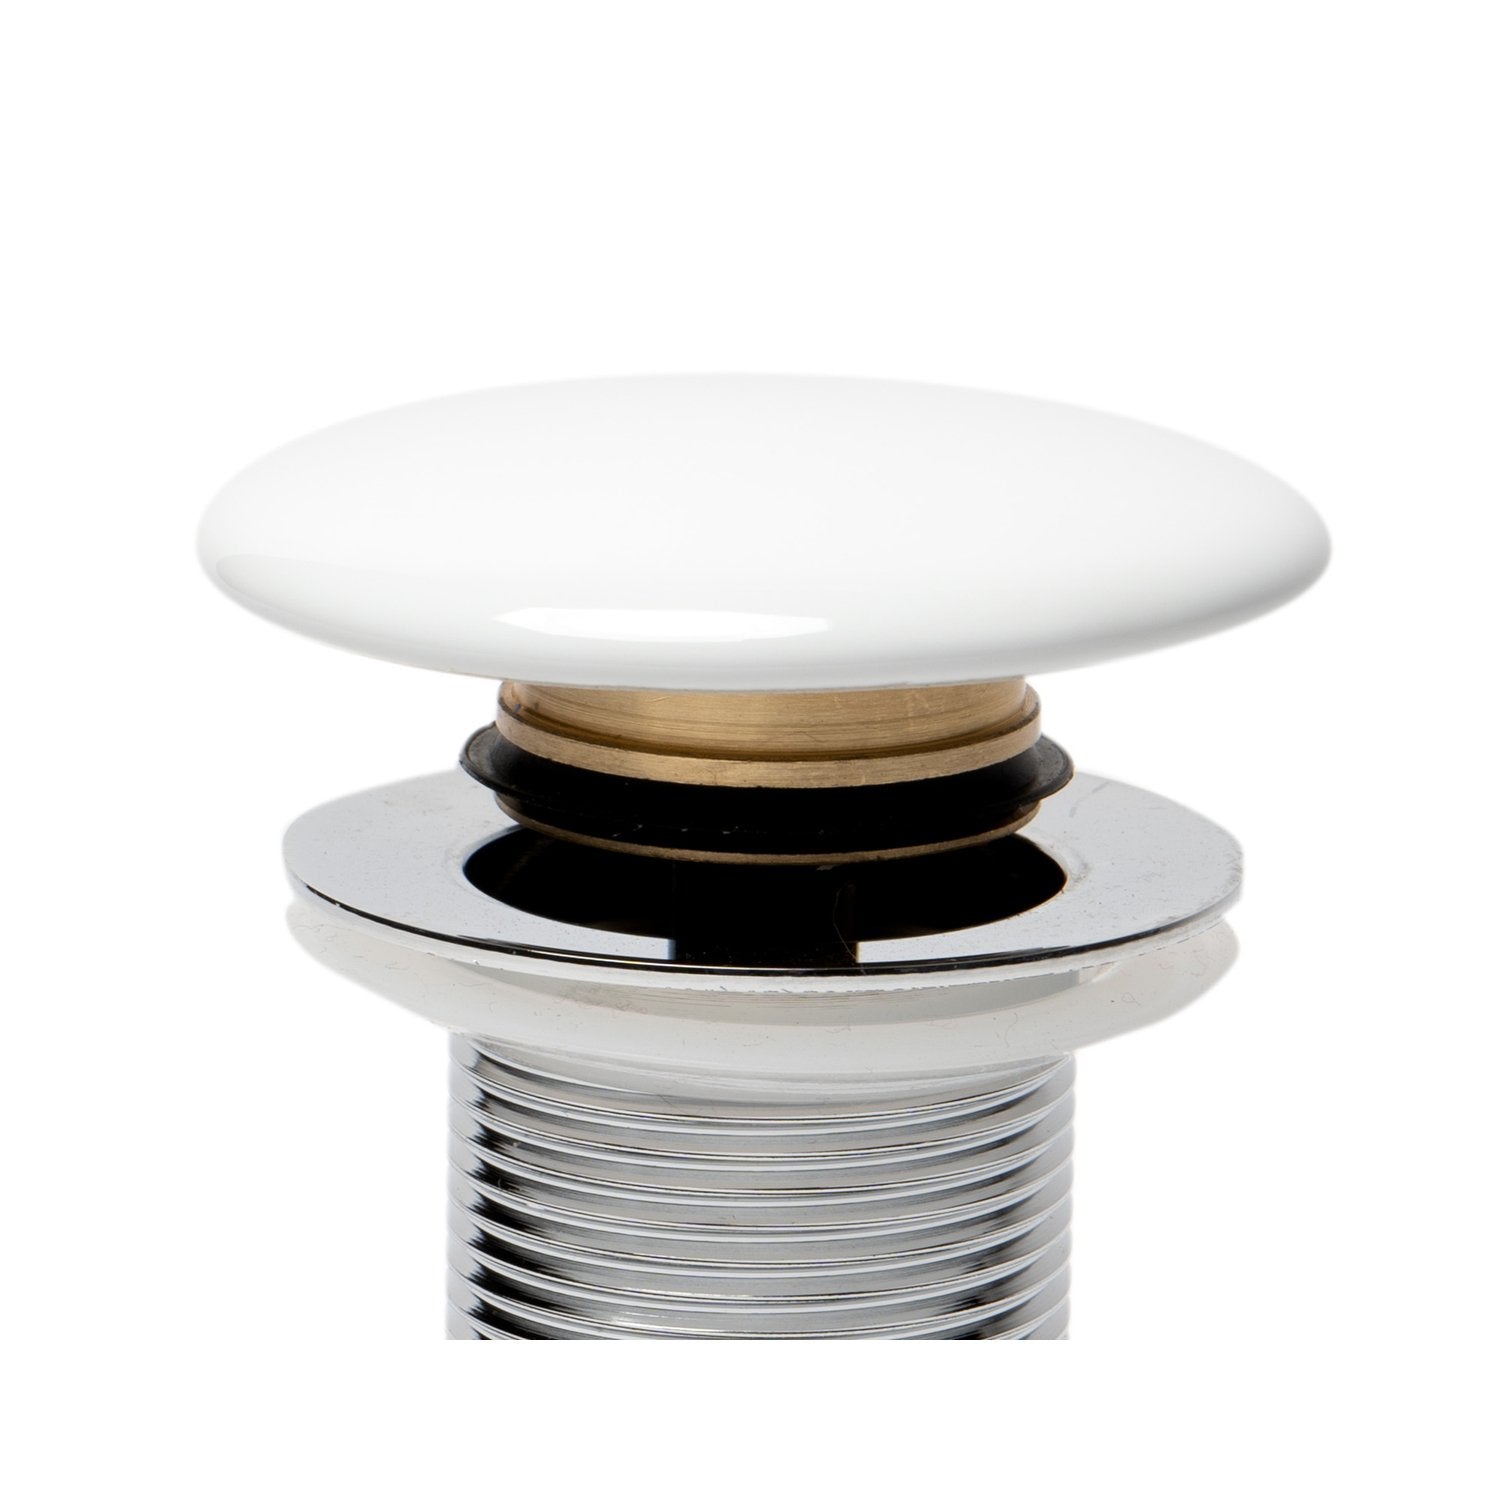 ALFI AB8055 Ceramic Mushroom Top Pop Up Drain for Sinks without Overflow